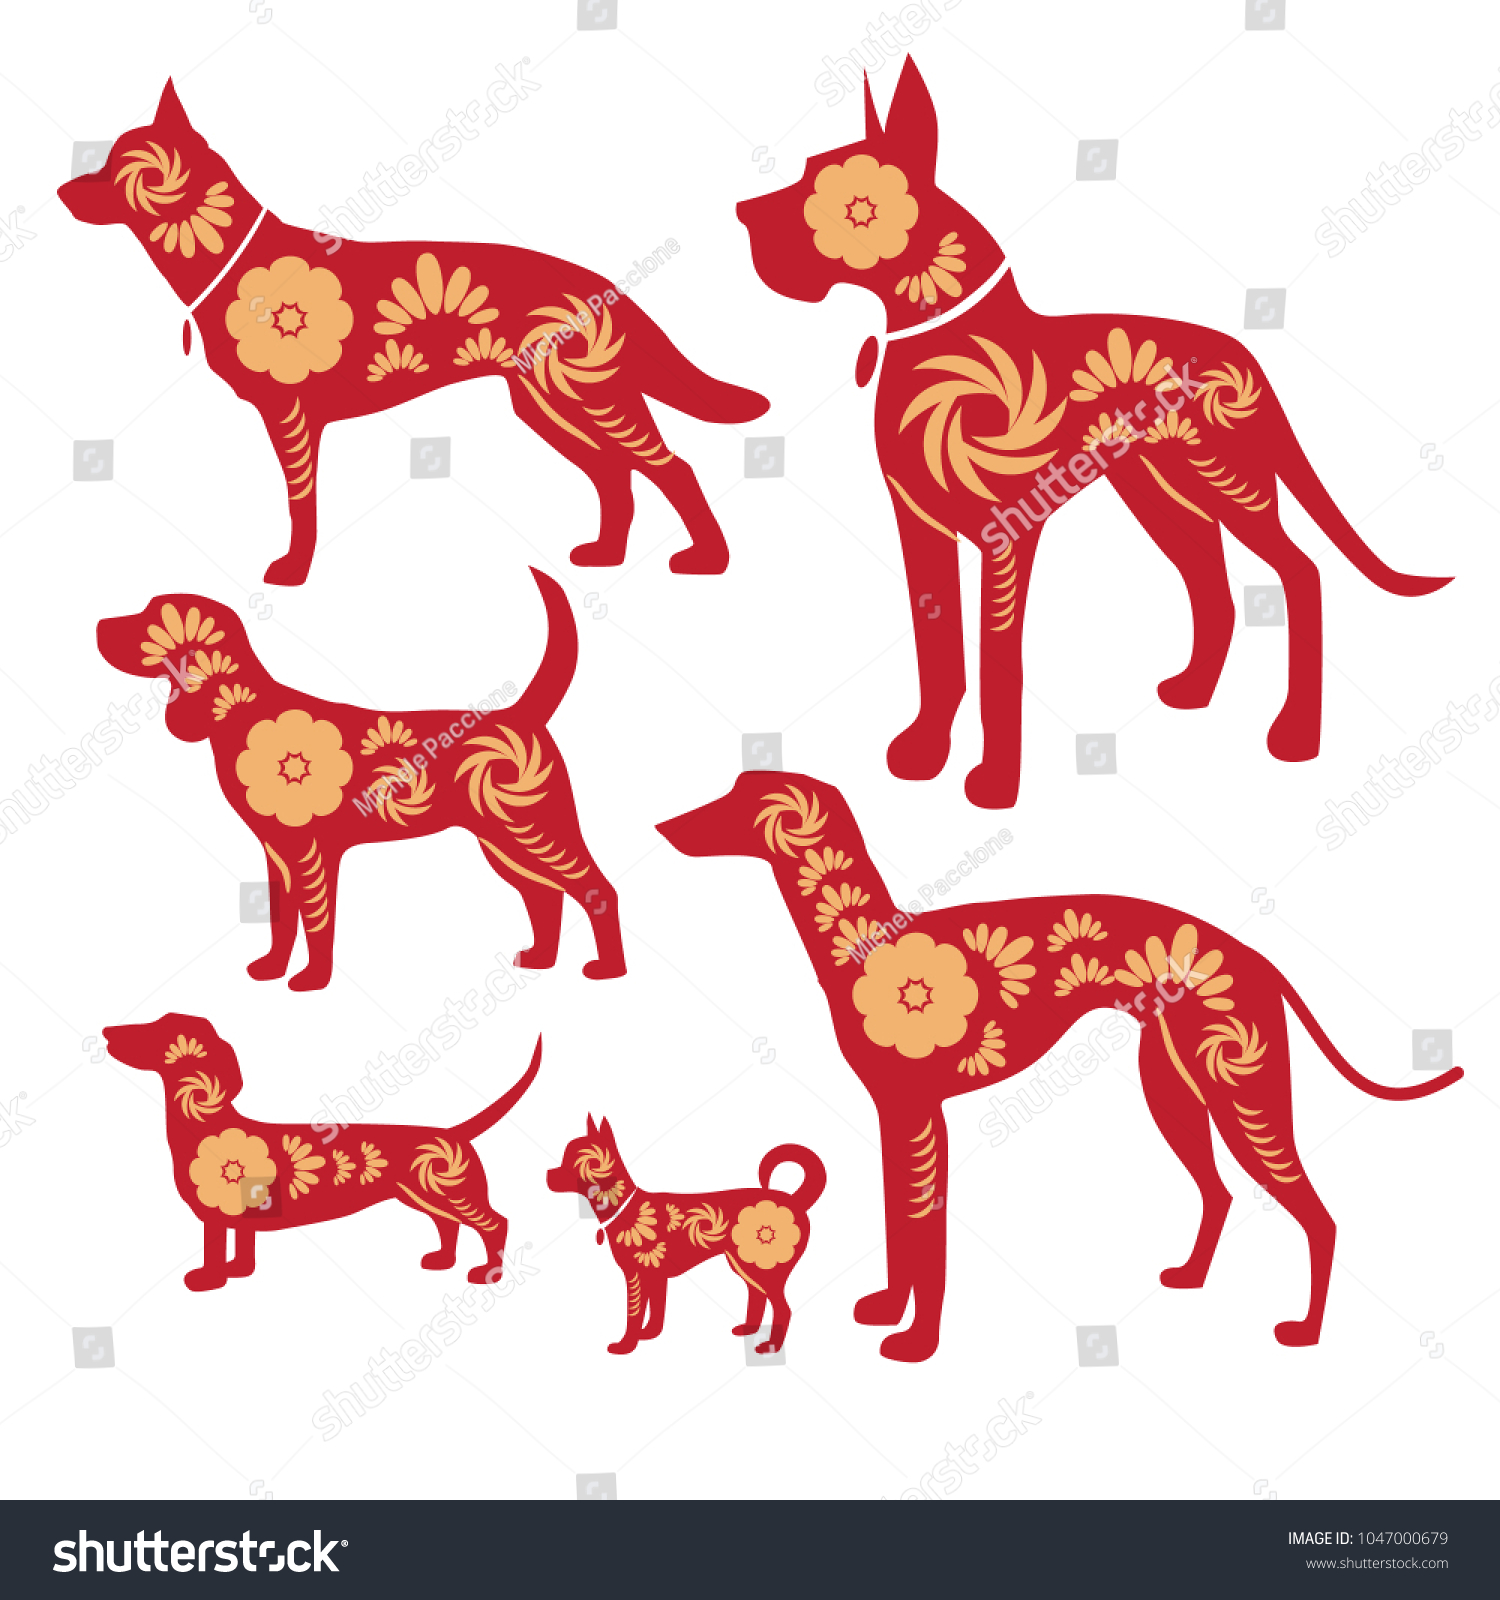 SVG of 2018 Year of the Dog decorated dog collection. EPS10 vector illustration. svg